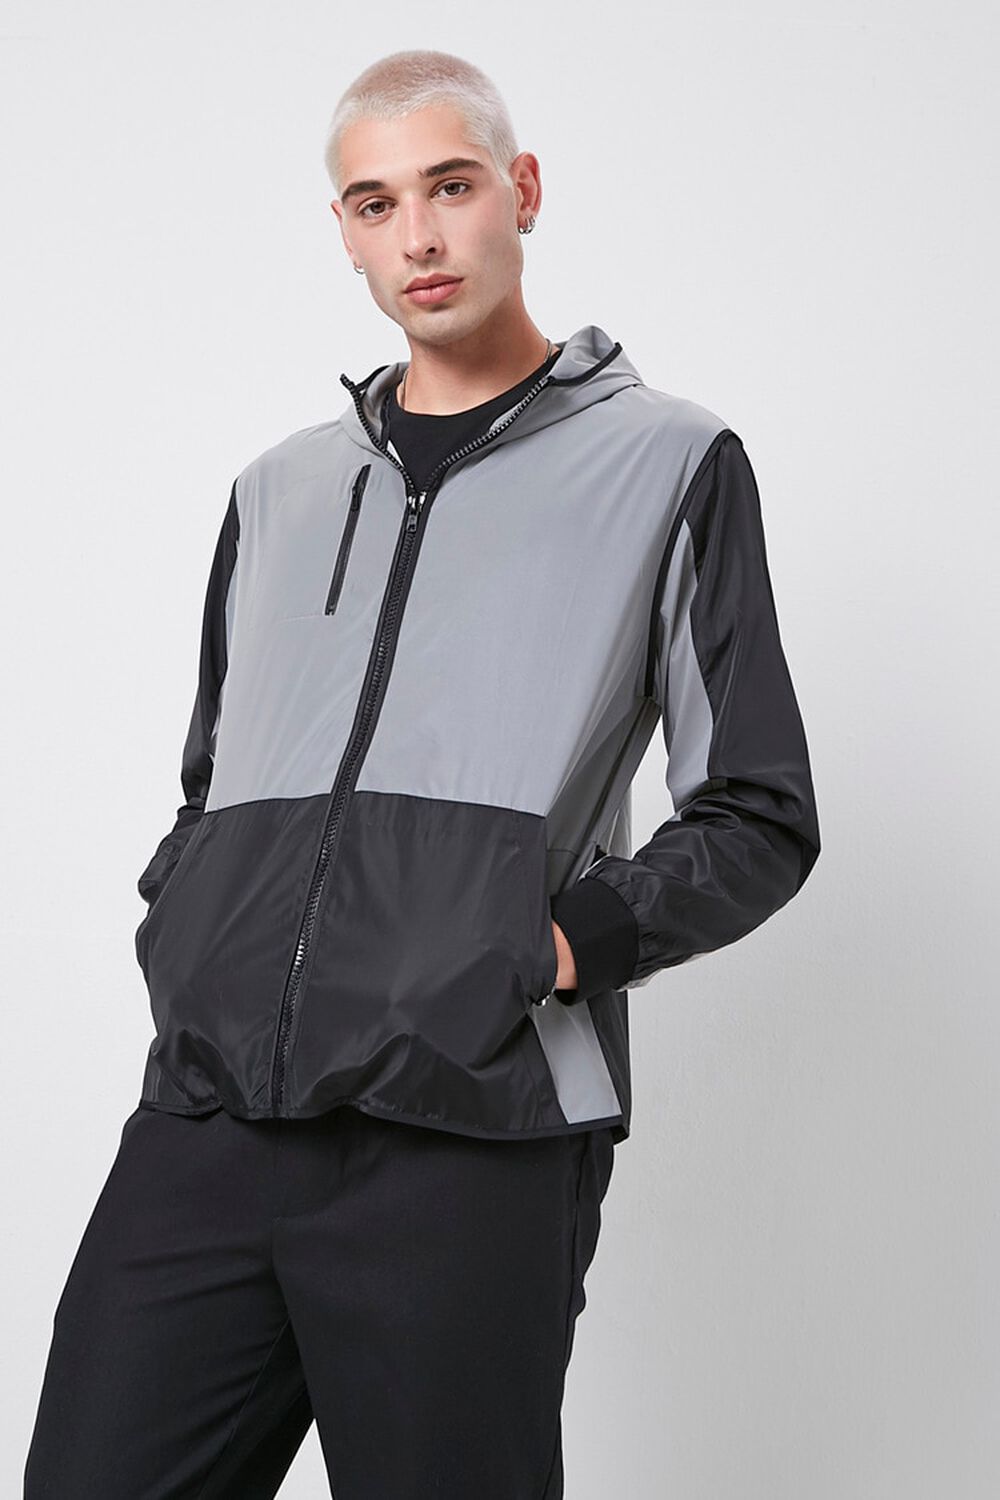 Shop Reflective Hooded Windbreaker Jacket for Men from latest collection at  Forever 21